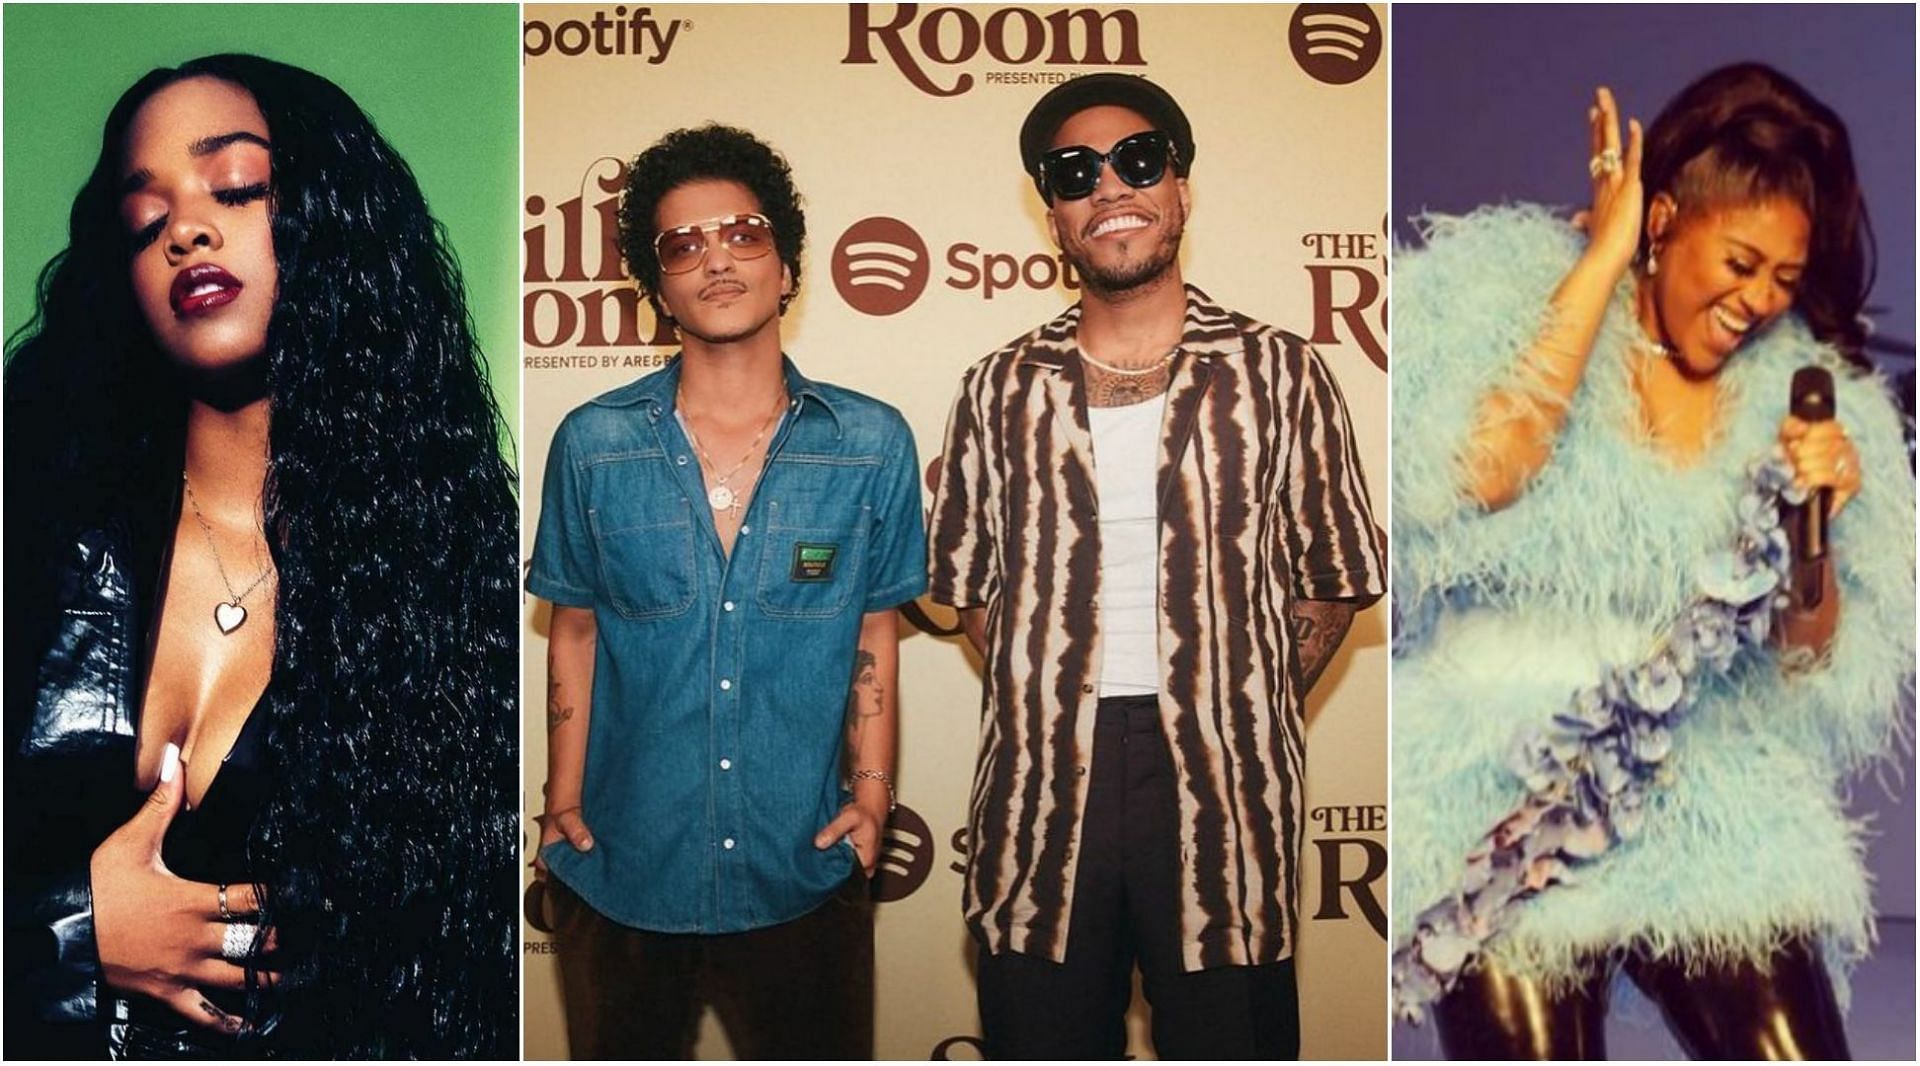  With the 2022 Grammys around the corner, the R&amp;B Song category is a hotly-contested one (Images via Instagram: jazminesullivan, silksonic, and hermusic)